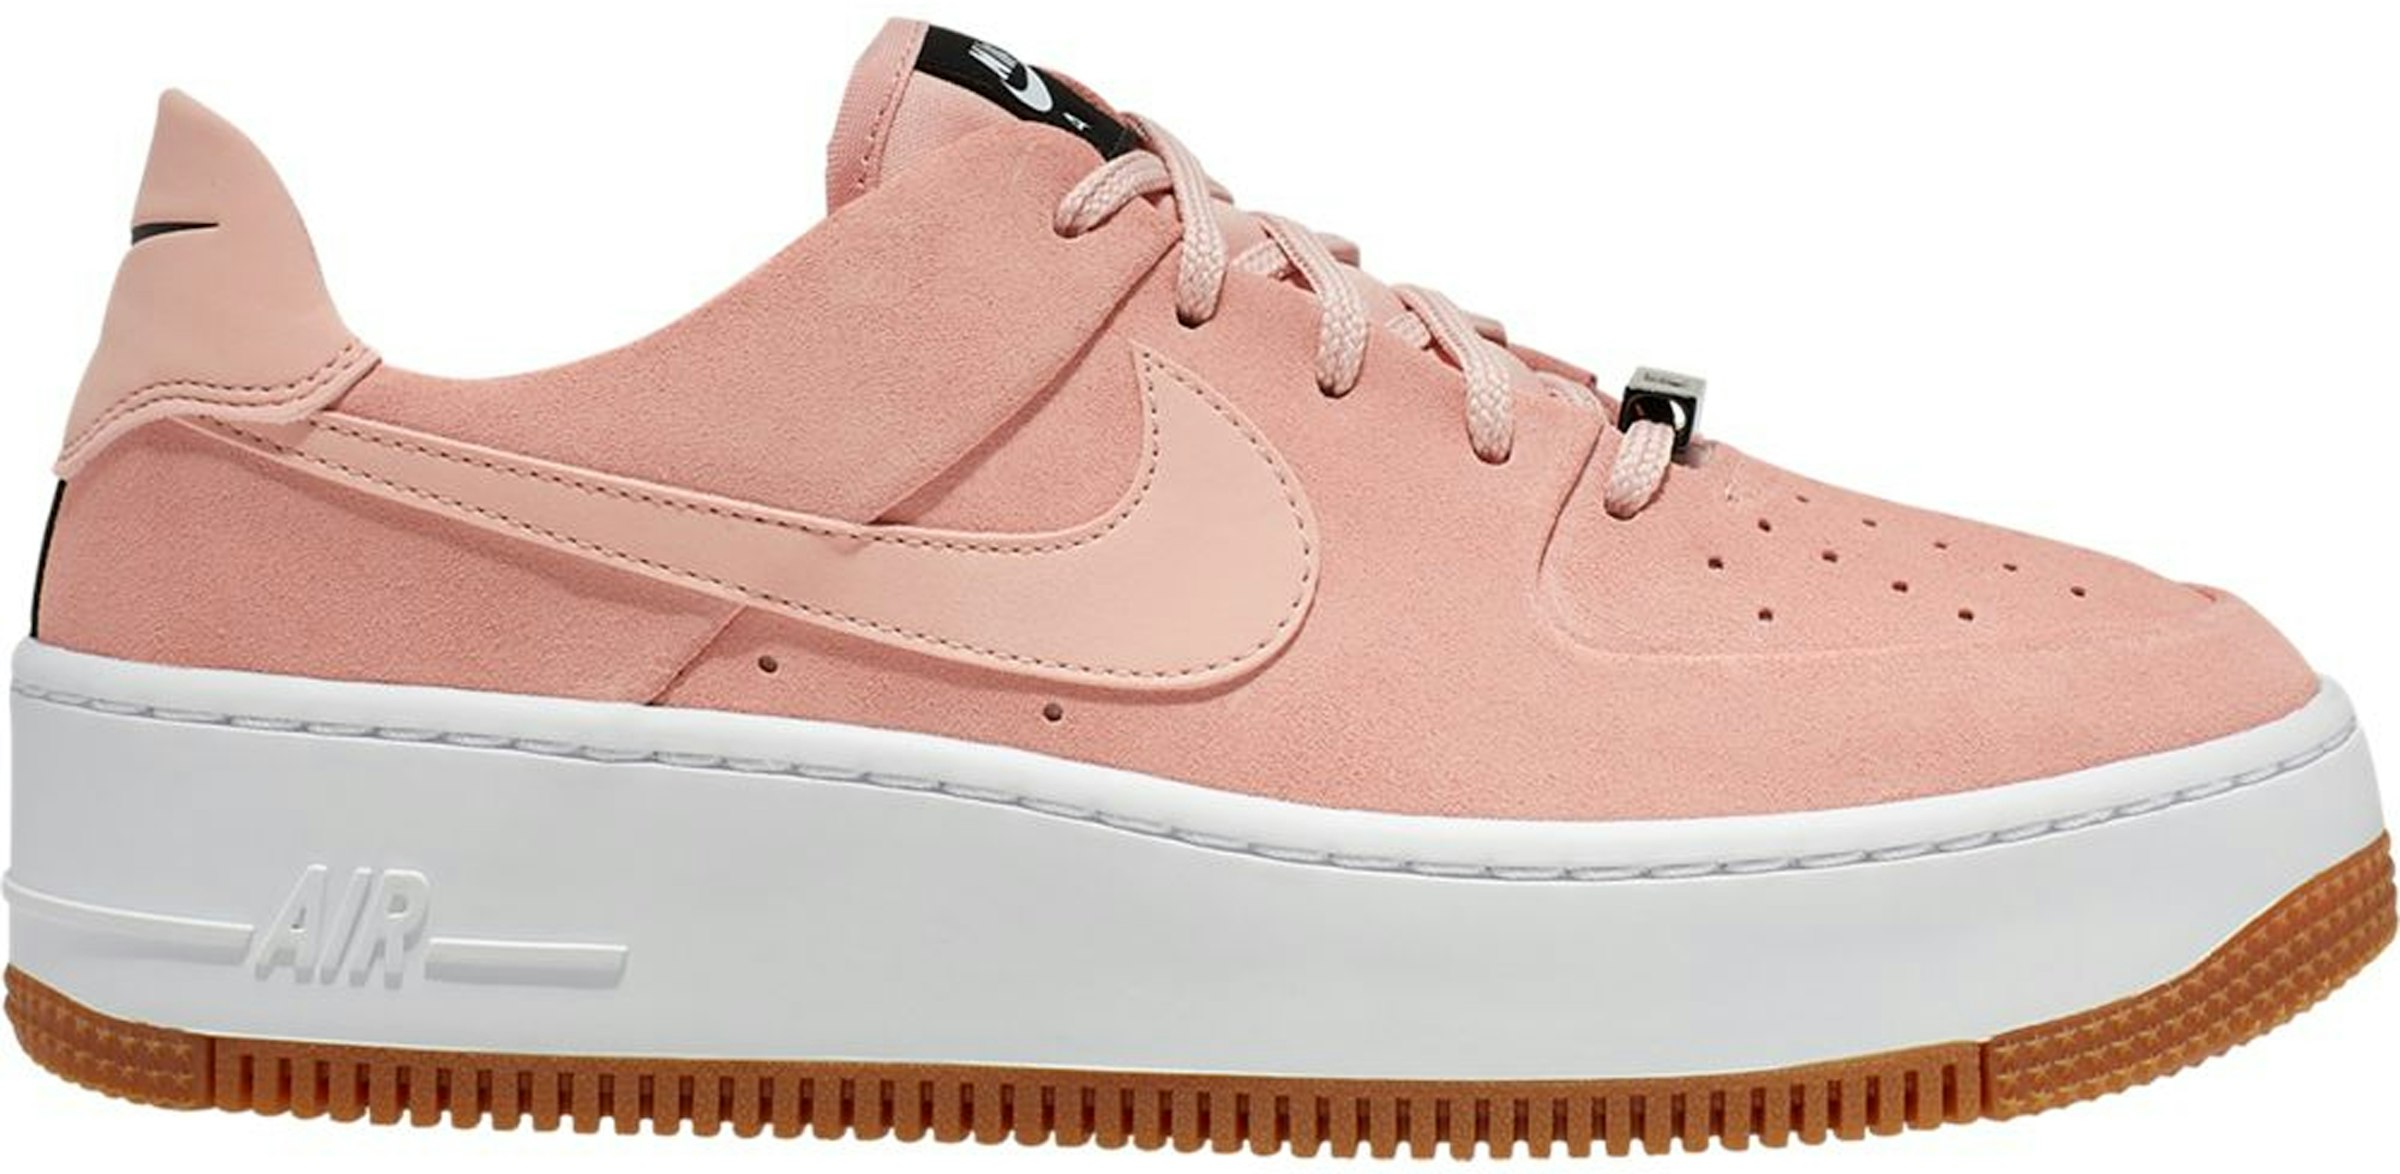 Nike Air Force 1 Sage Low Coral Stardust (Women's) AR5339-603 - US